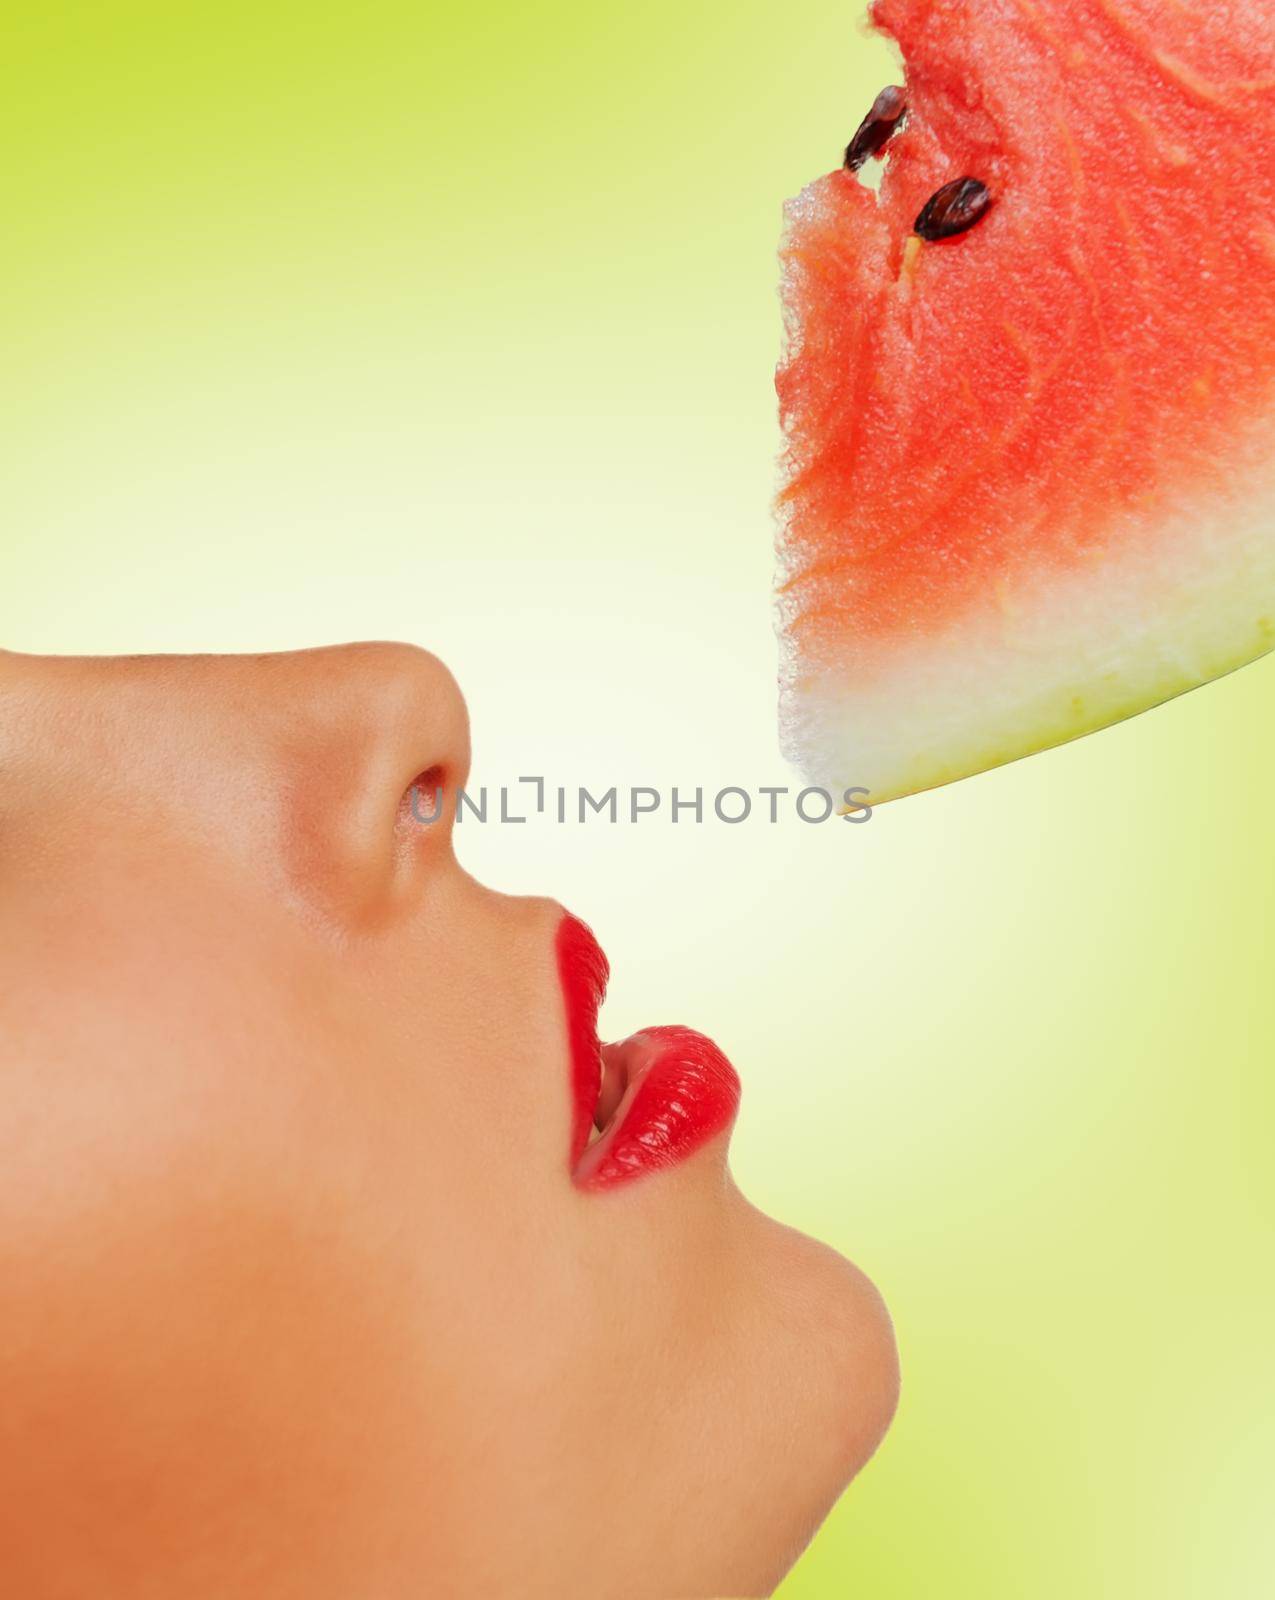 Close-up image of a red lips and a piece of watermelon